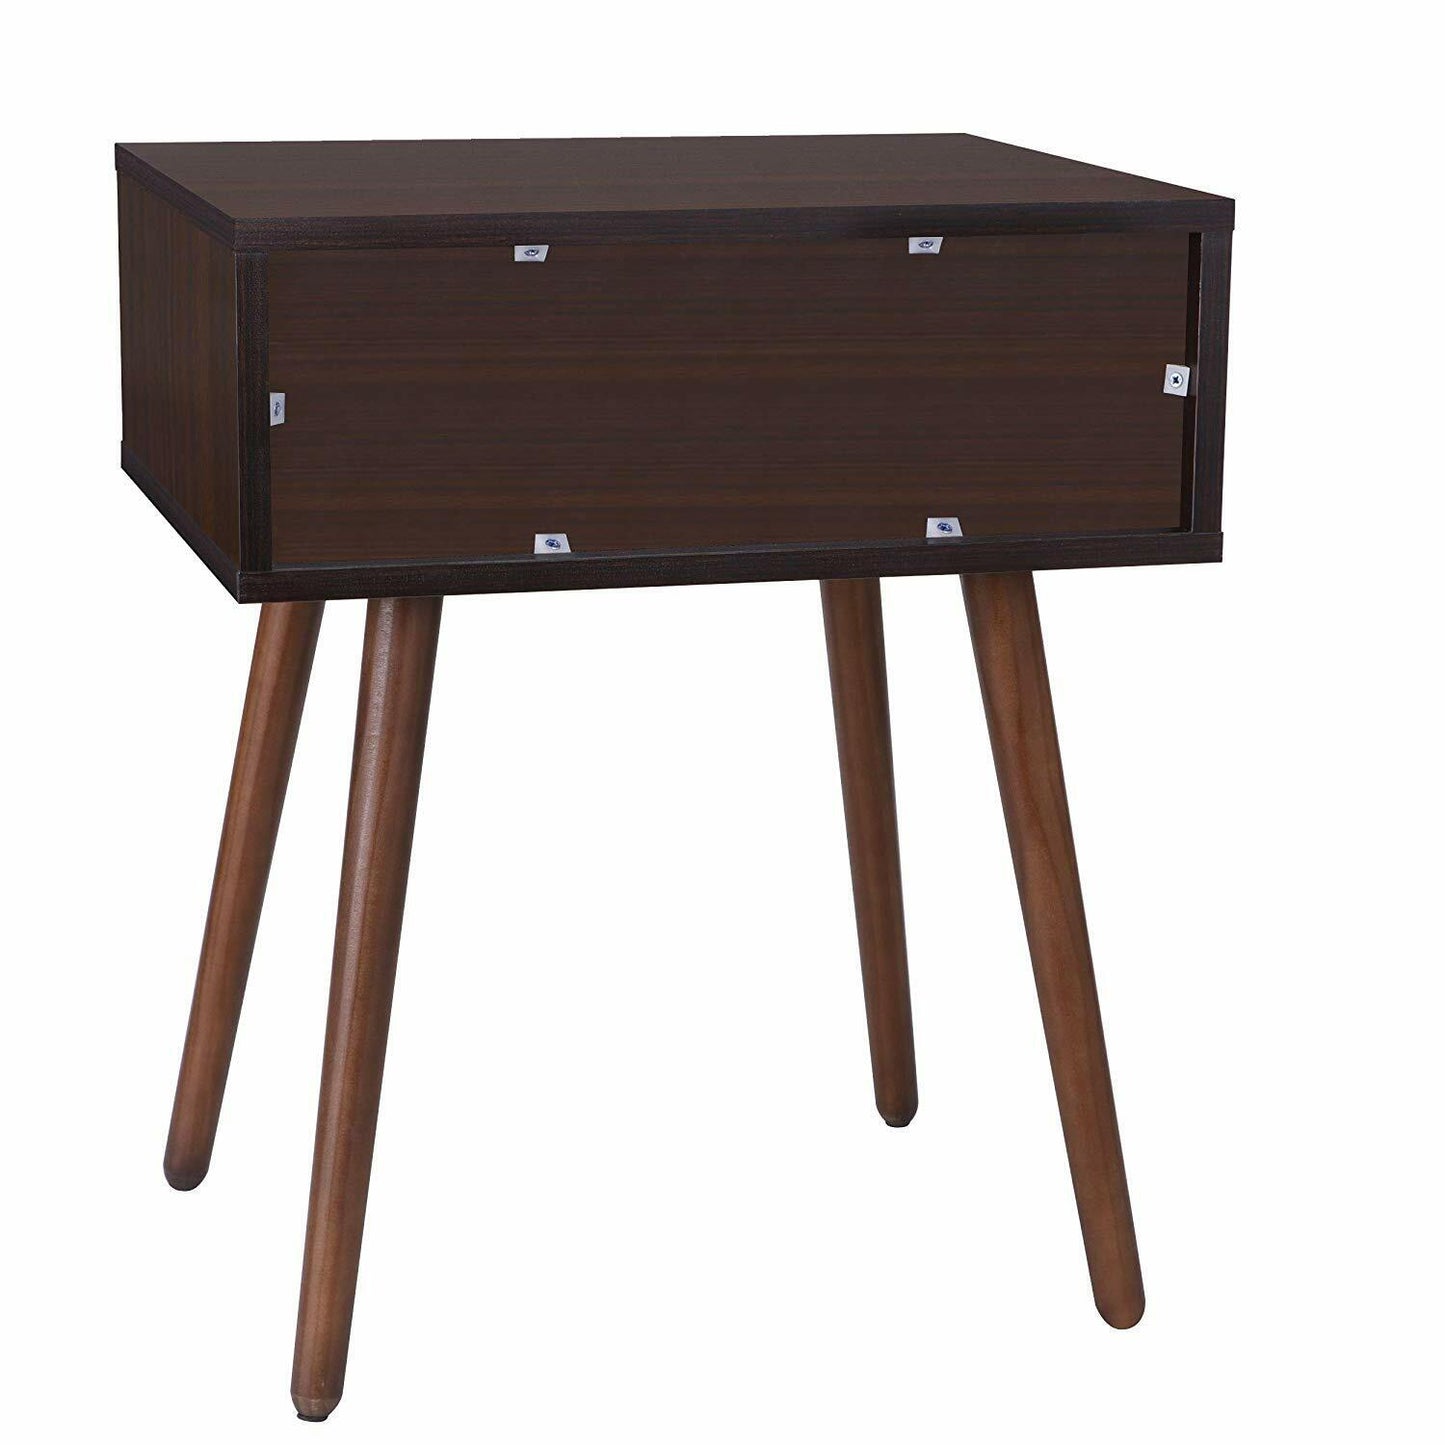 Fashion Wooden Side End Table w/Drawer for Small Space, Living Room, Bedroom